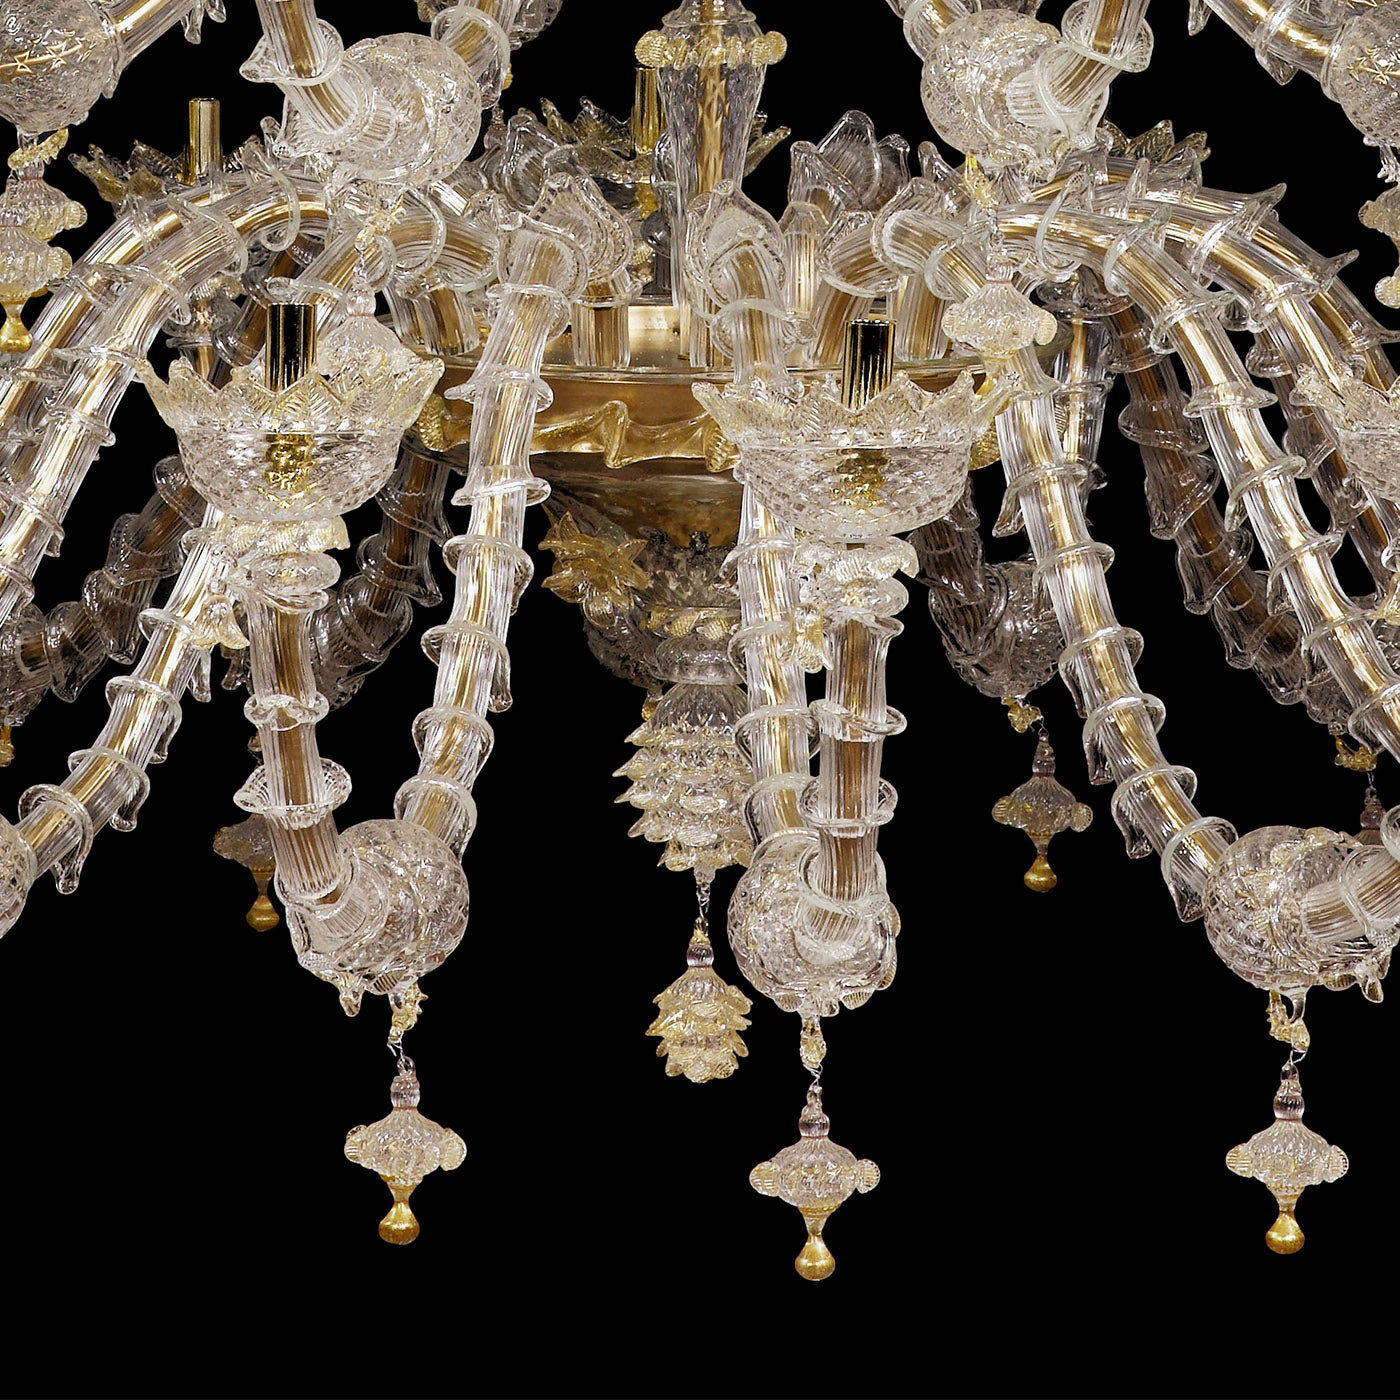 Rezzonico-style Gold and Crystal Chandelier #2 - Alternative view 2